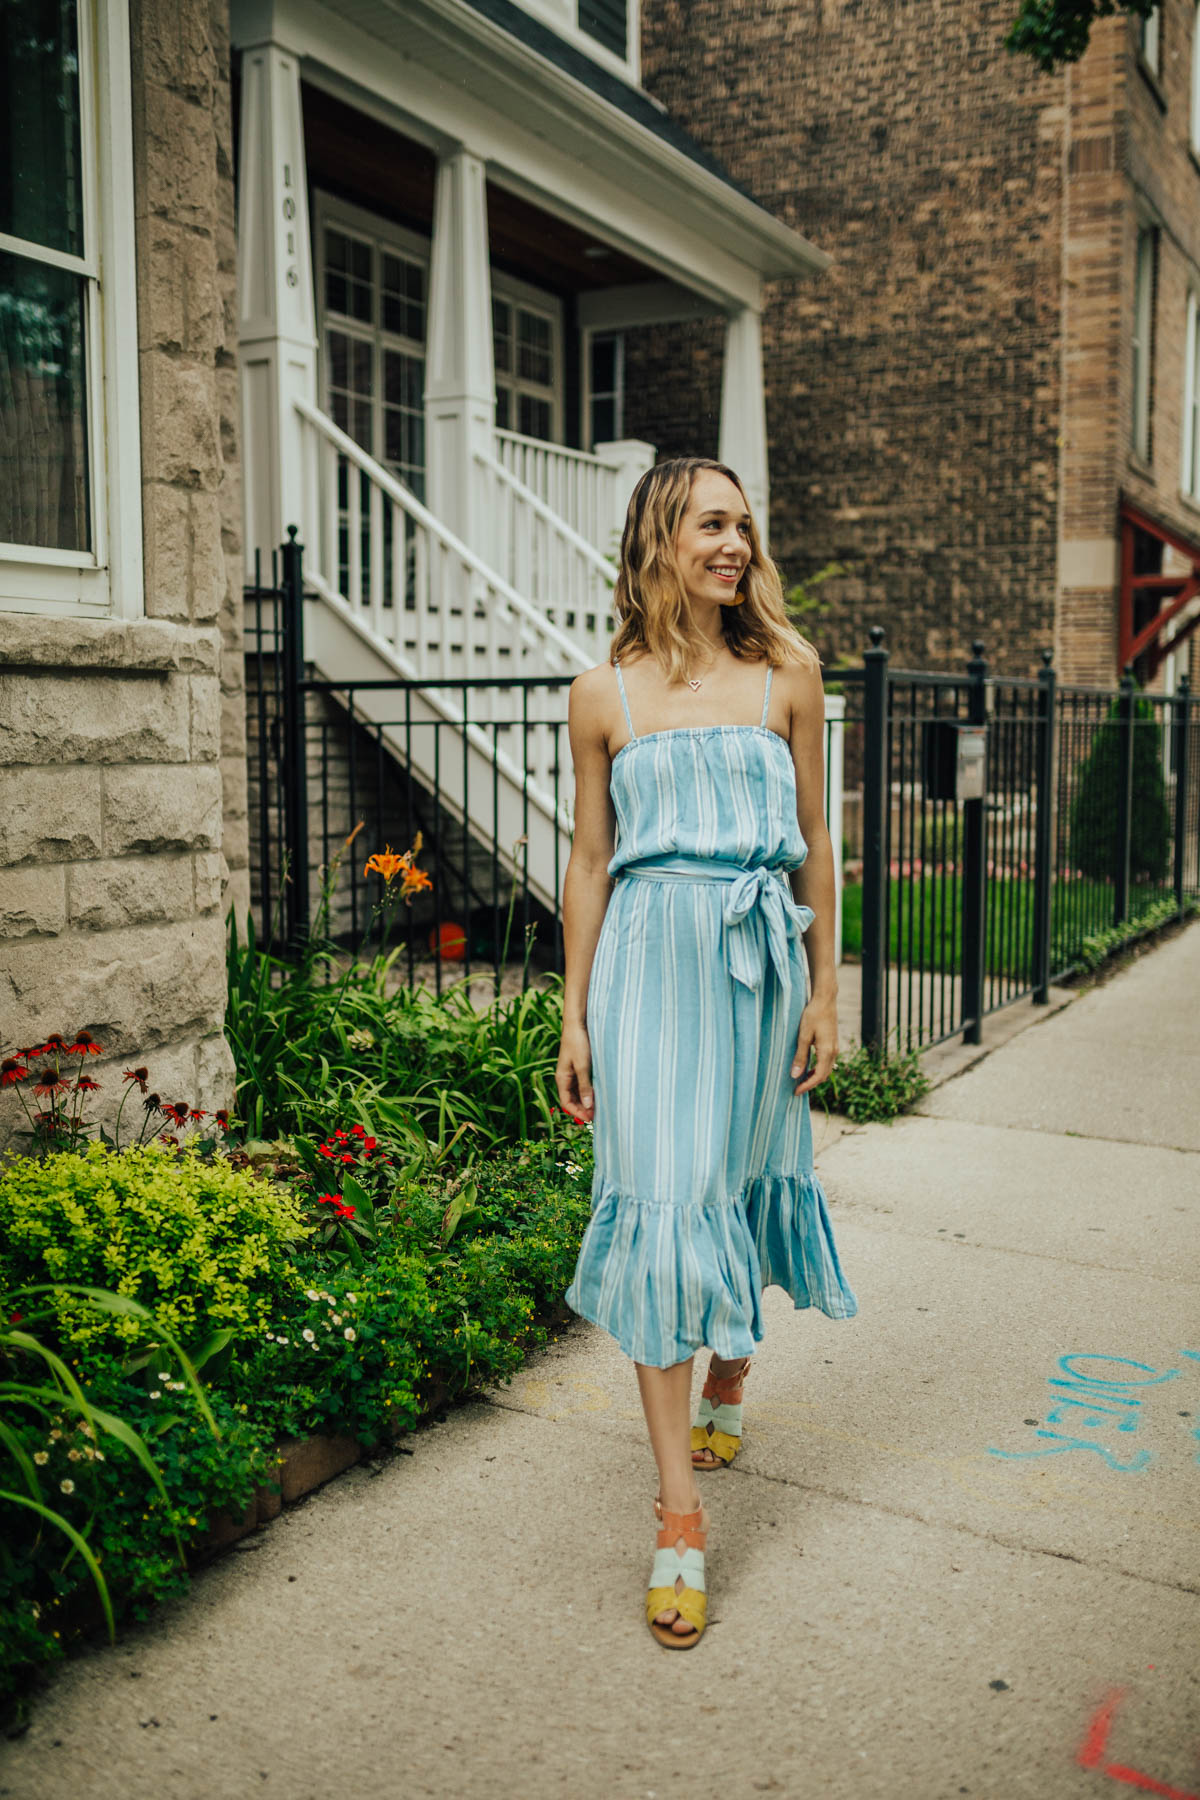 Blair is sharing How To Wear A Midi Dress